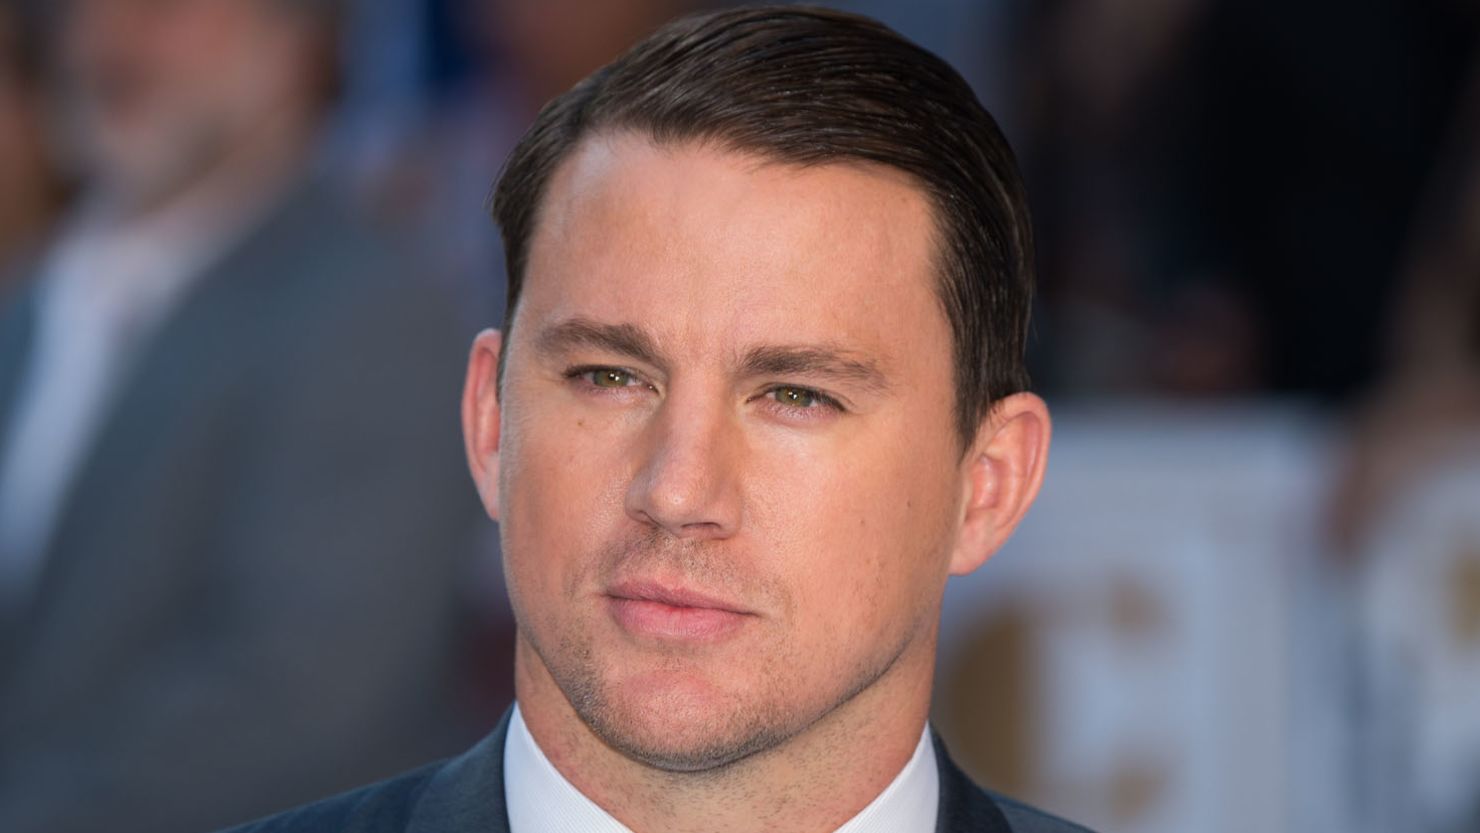 Channing Tatum shares touching post about his daughter | CNN